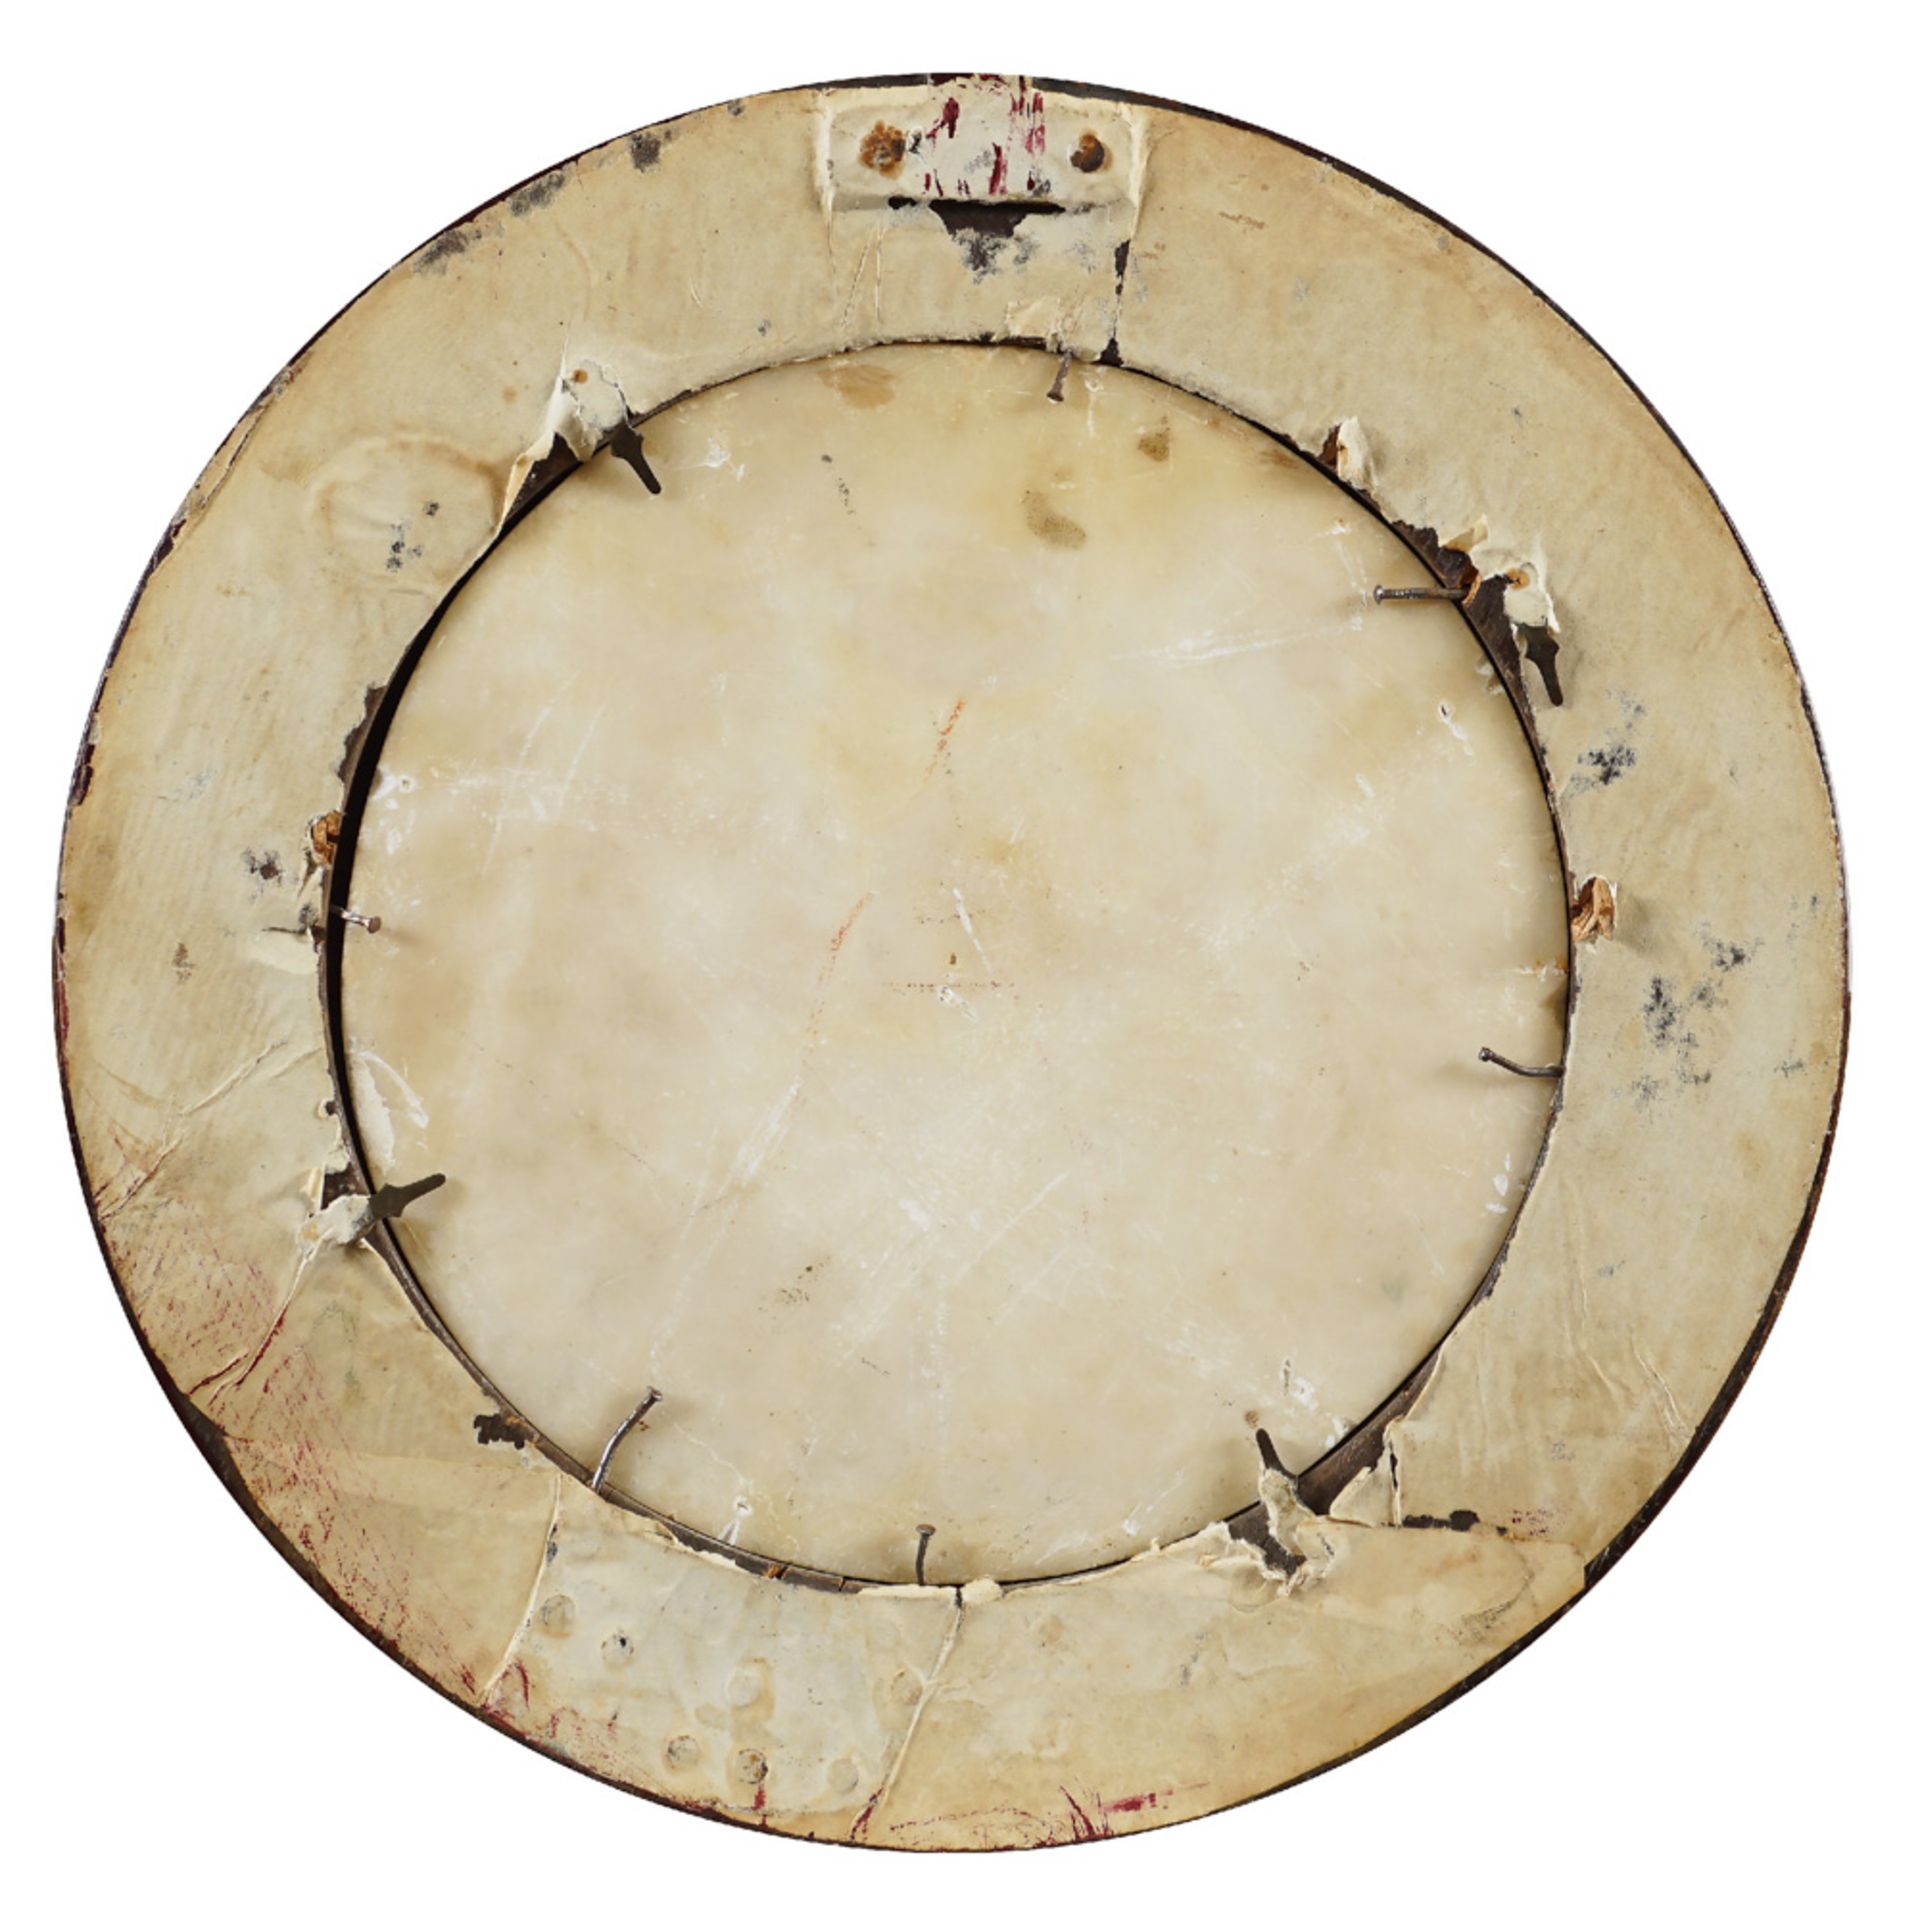 White marble circular plaque Italy, 20th century d. 18 cm. - Image 2 of 2